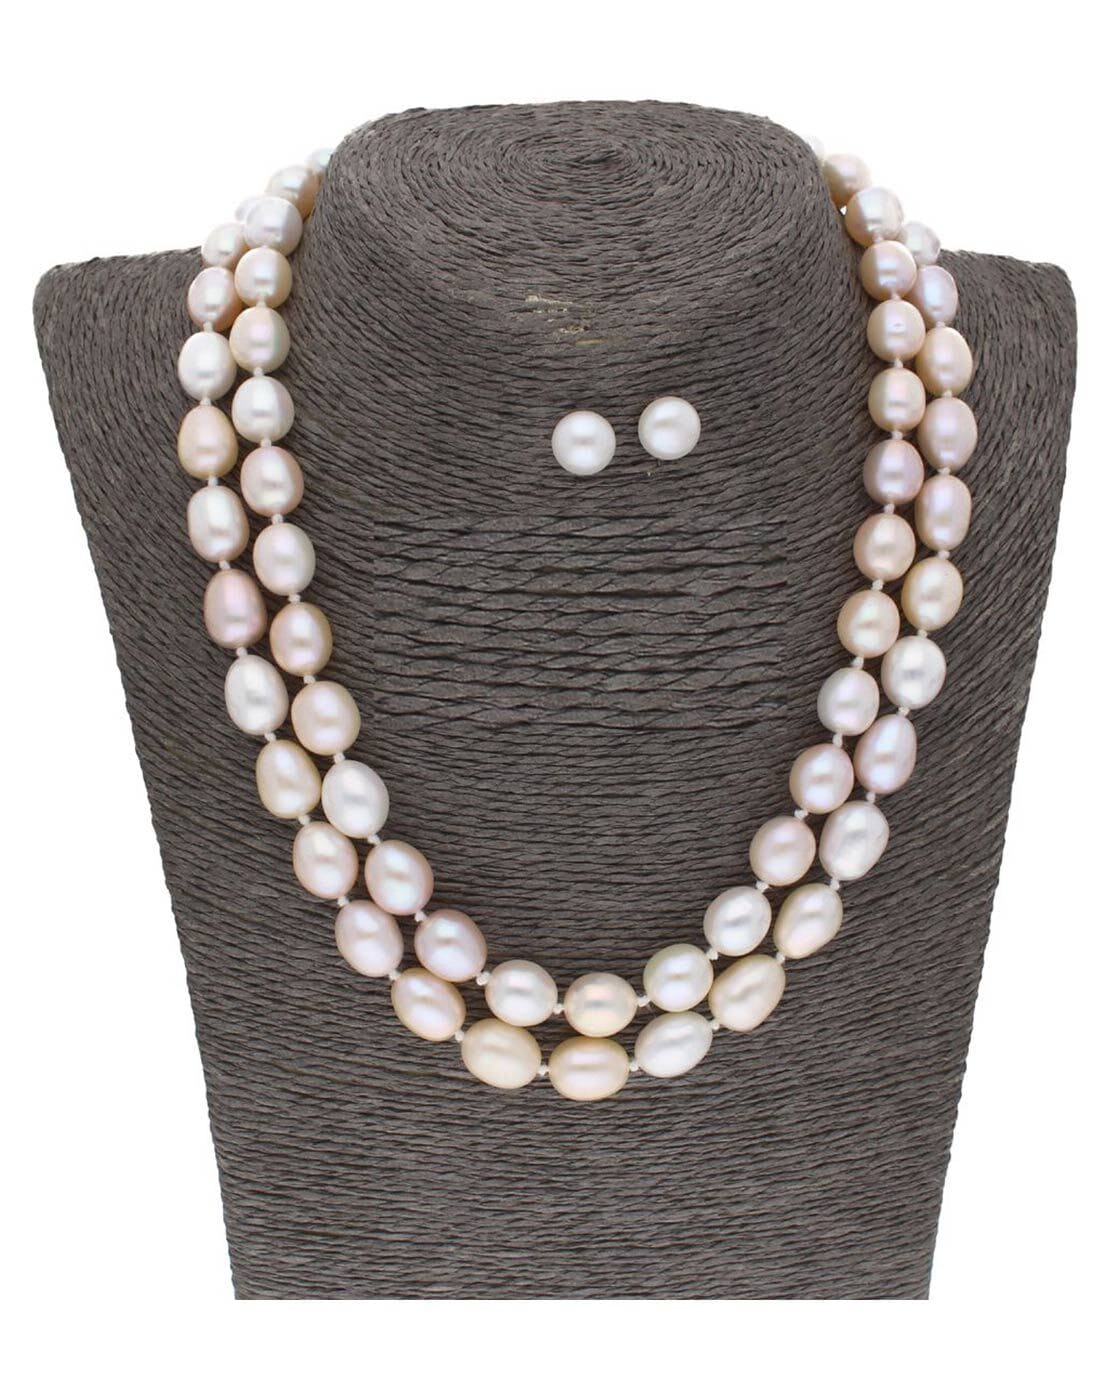 Pearl necklace - Mini Naomi | Ana Luisa | Online Jewelry Store At Prices  You'll Love